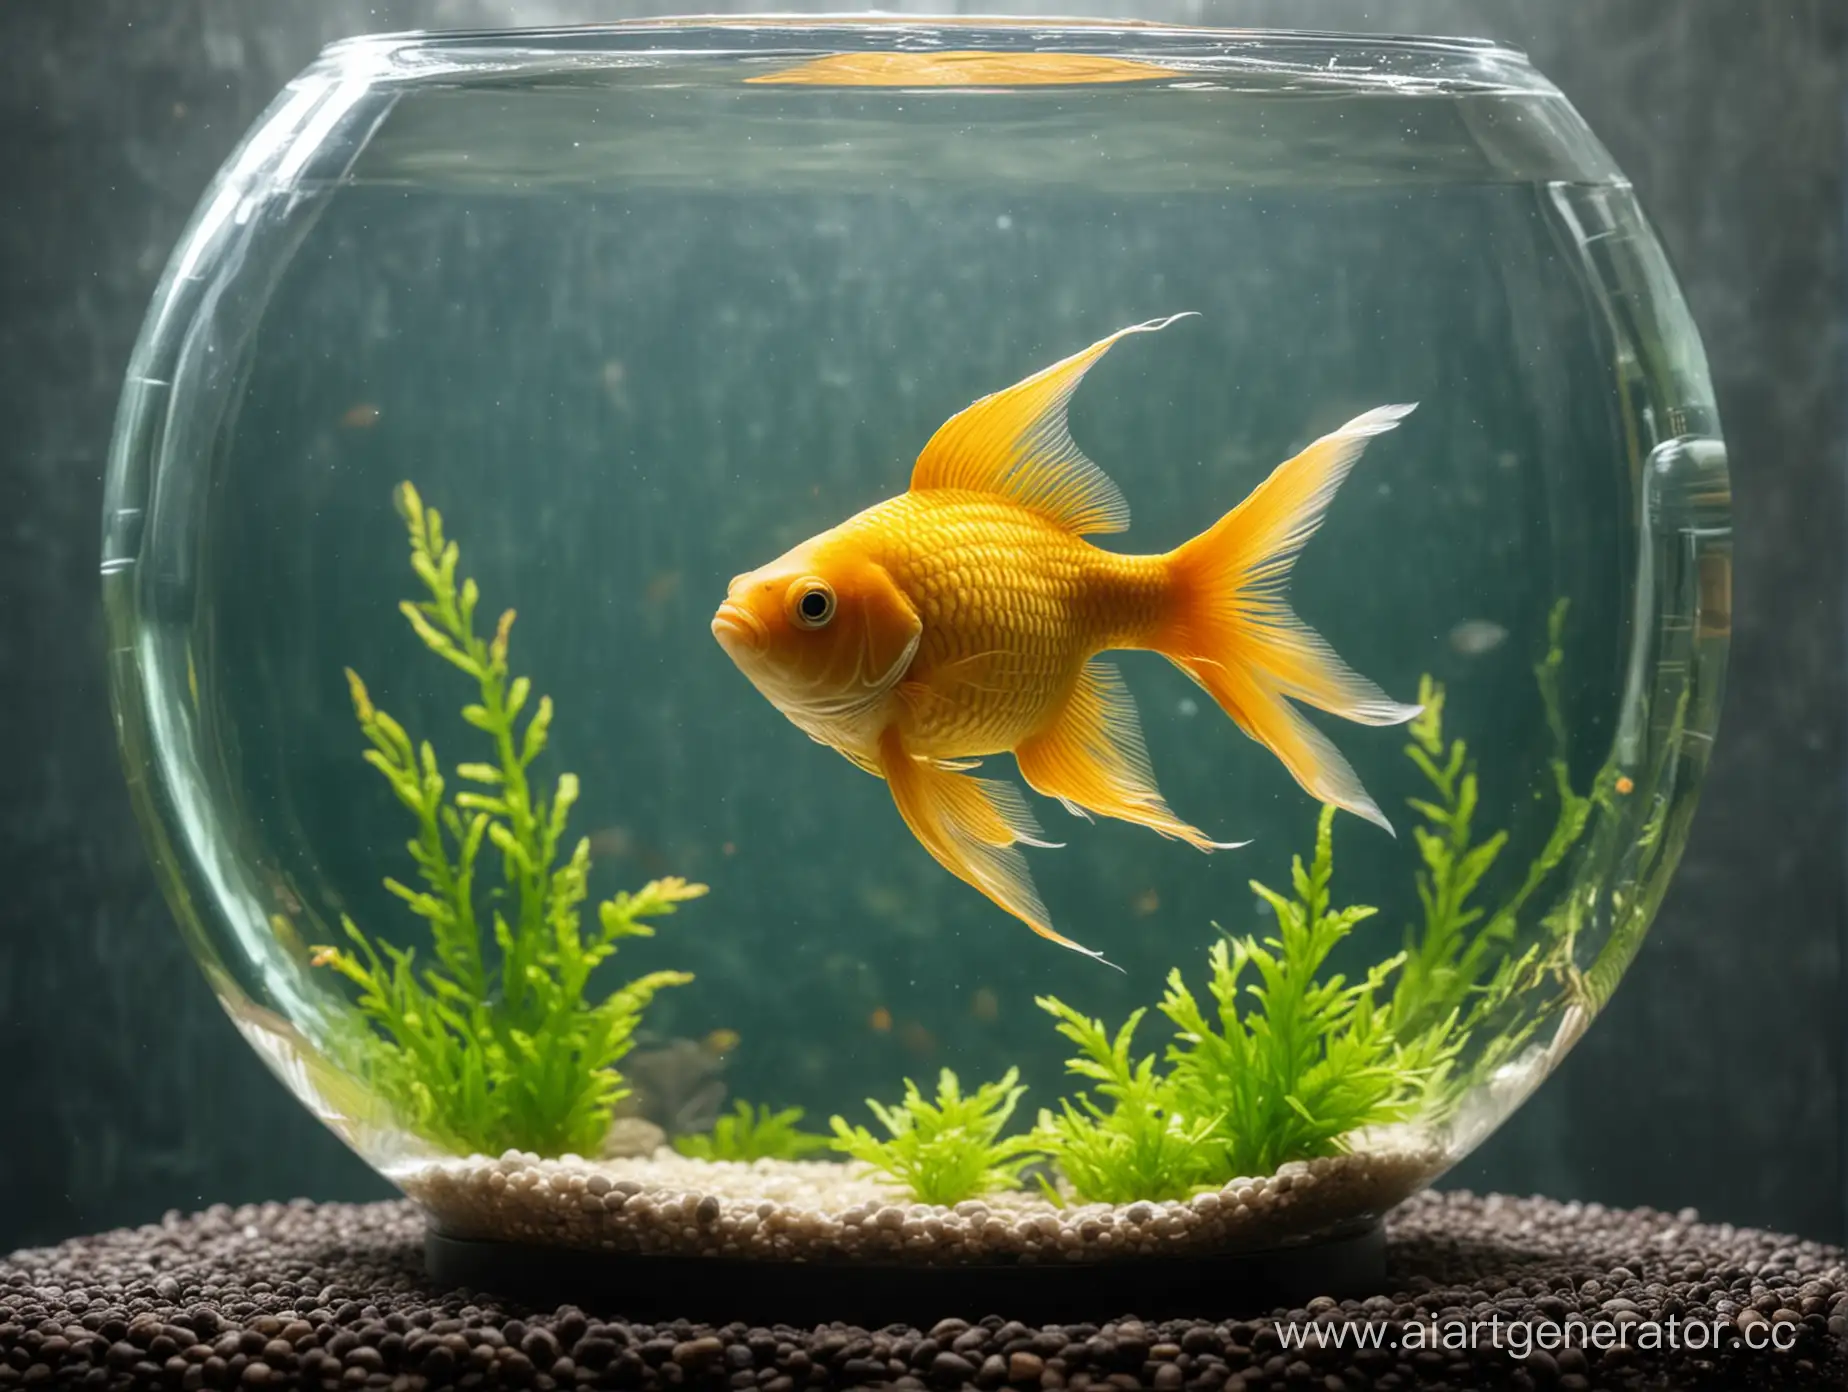 Shimmering-Goldfish-in-a-Spherical-Tank-for-Aquatic-Celebration